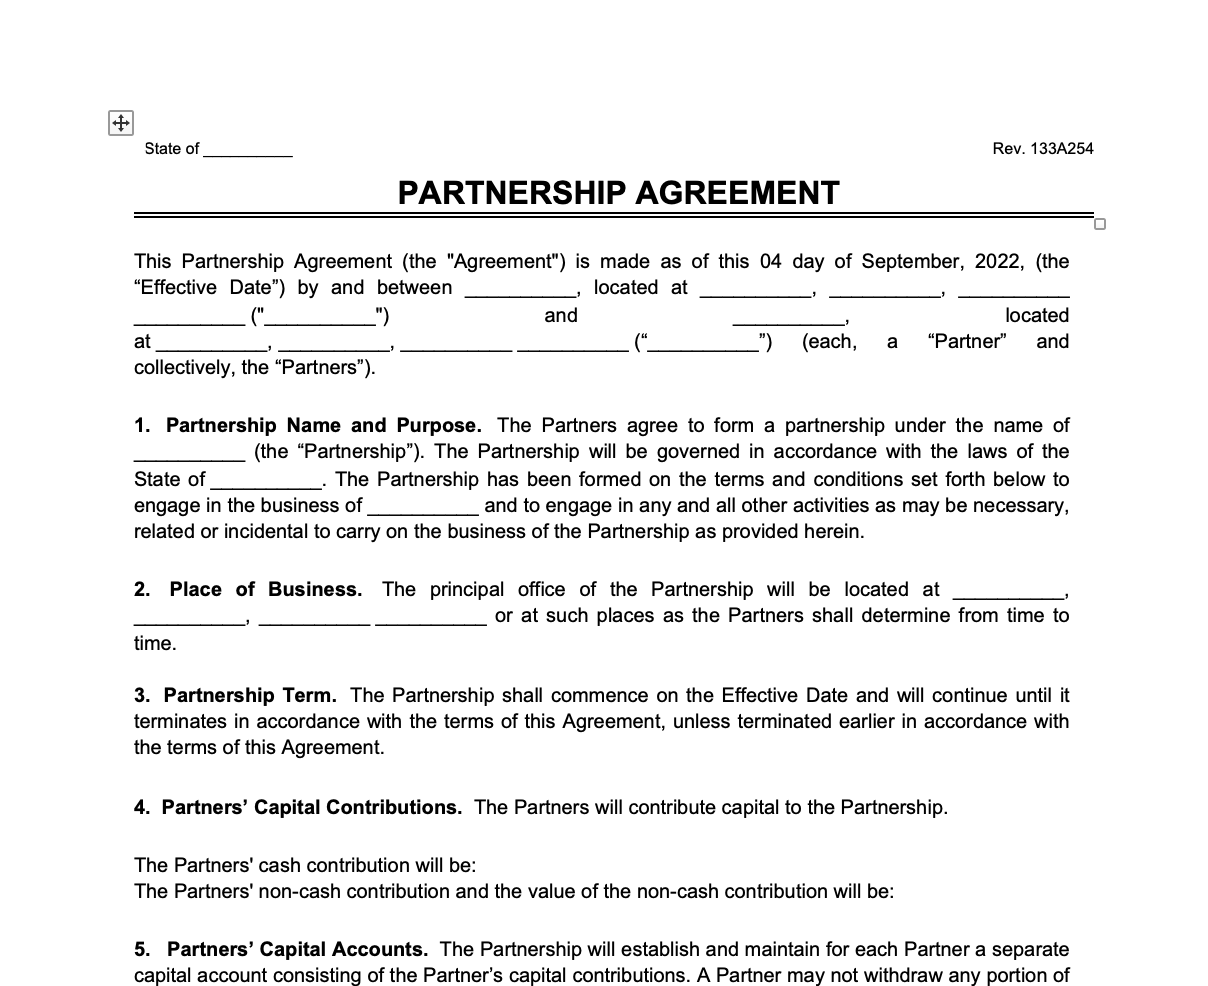 Partnership Agreement (Needed For YOUR Partnership!)